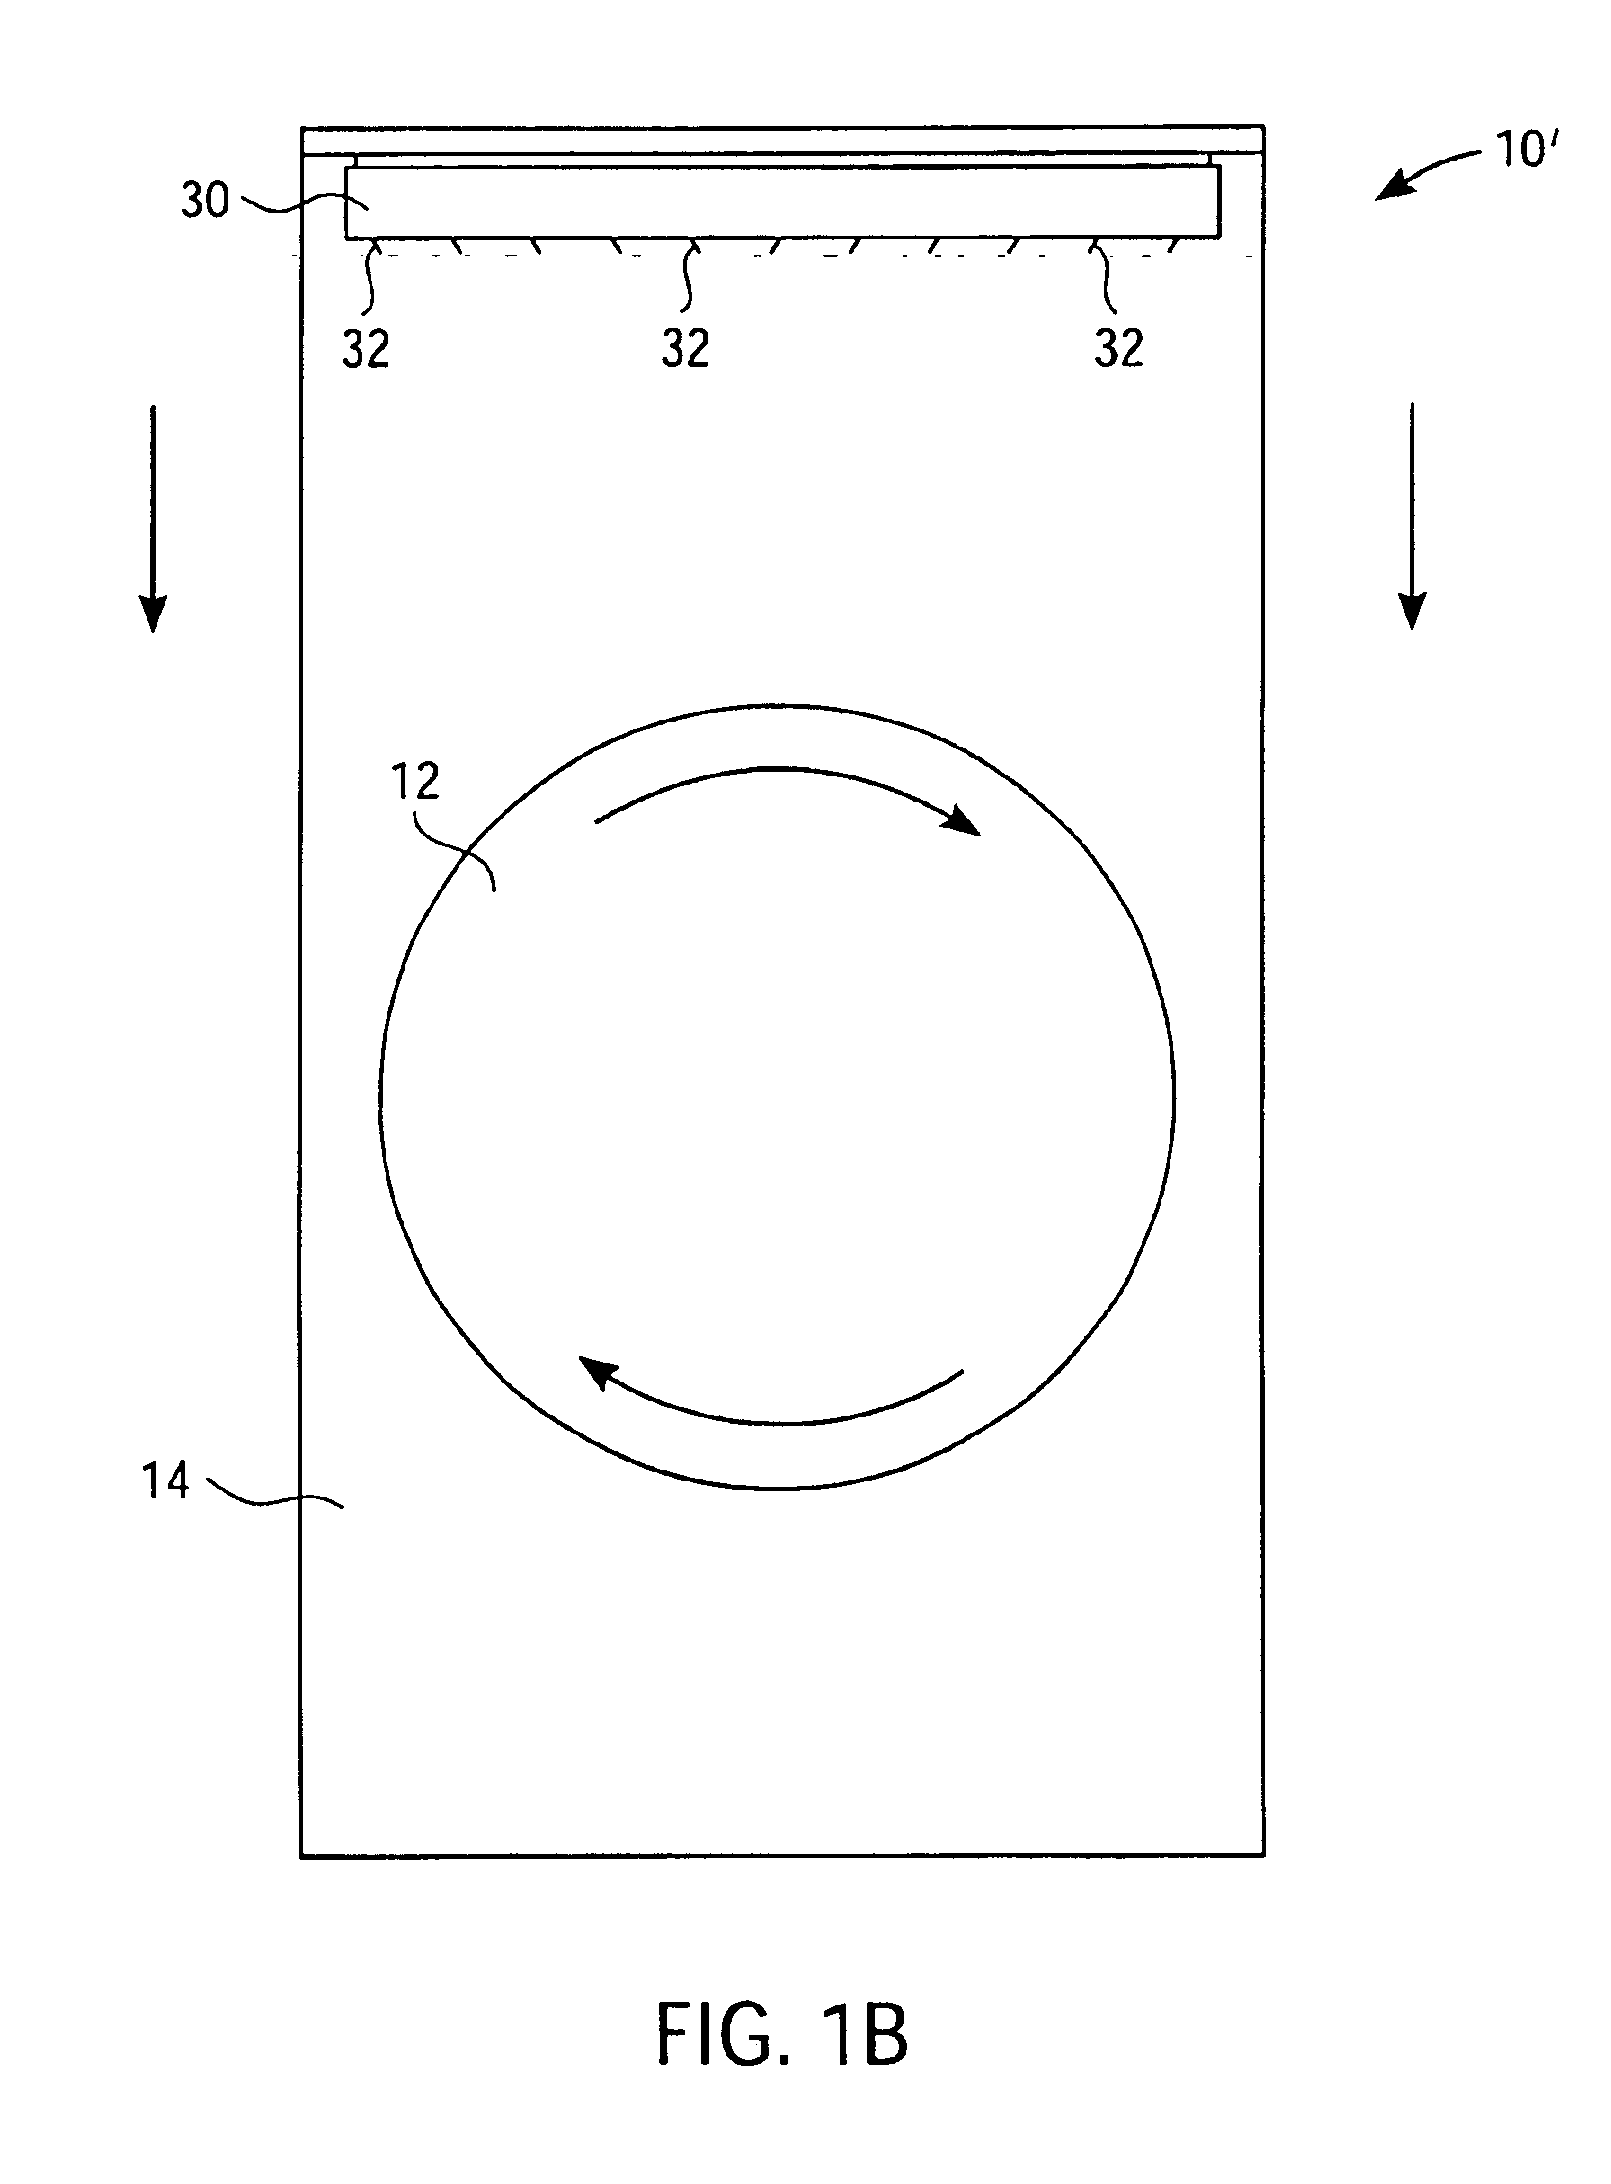 System, method and apparatus for applying liquid to a CMP polishing pad